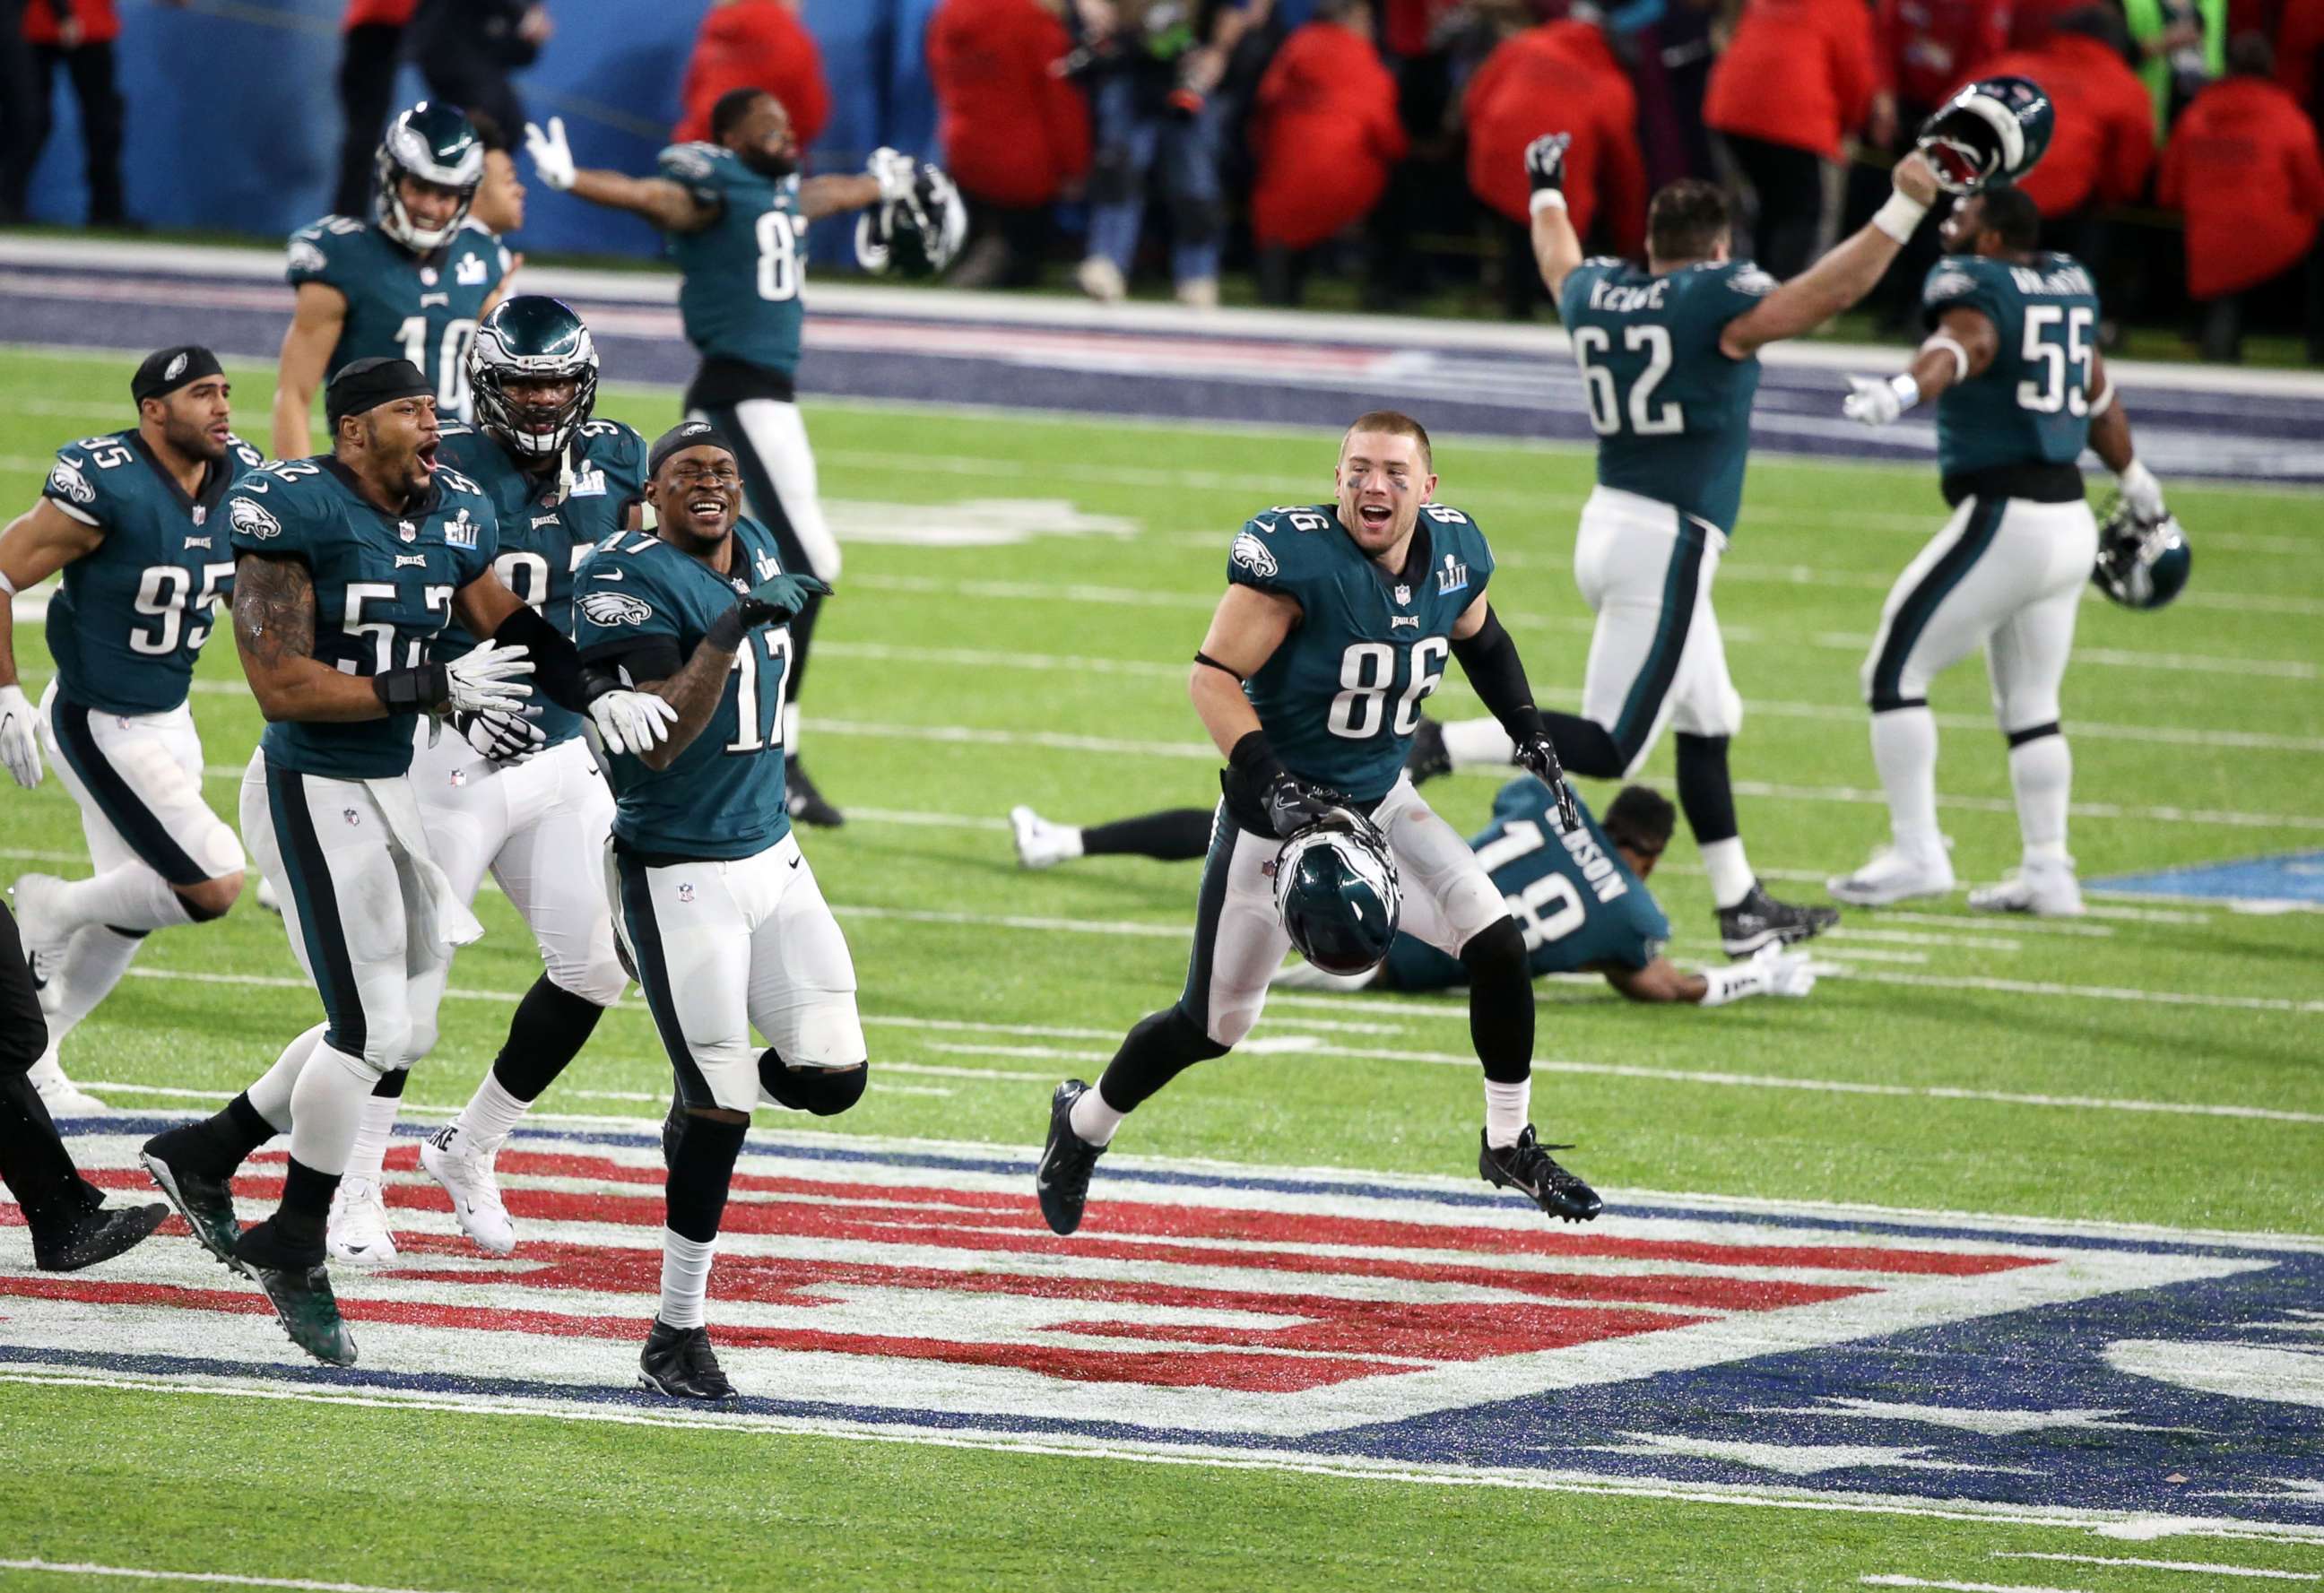 How Many Times Have the Philadelphia Eagles Been to the Super Bowl